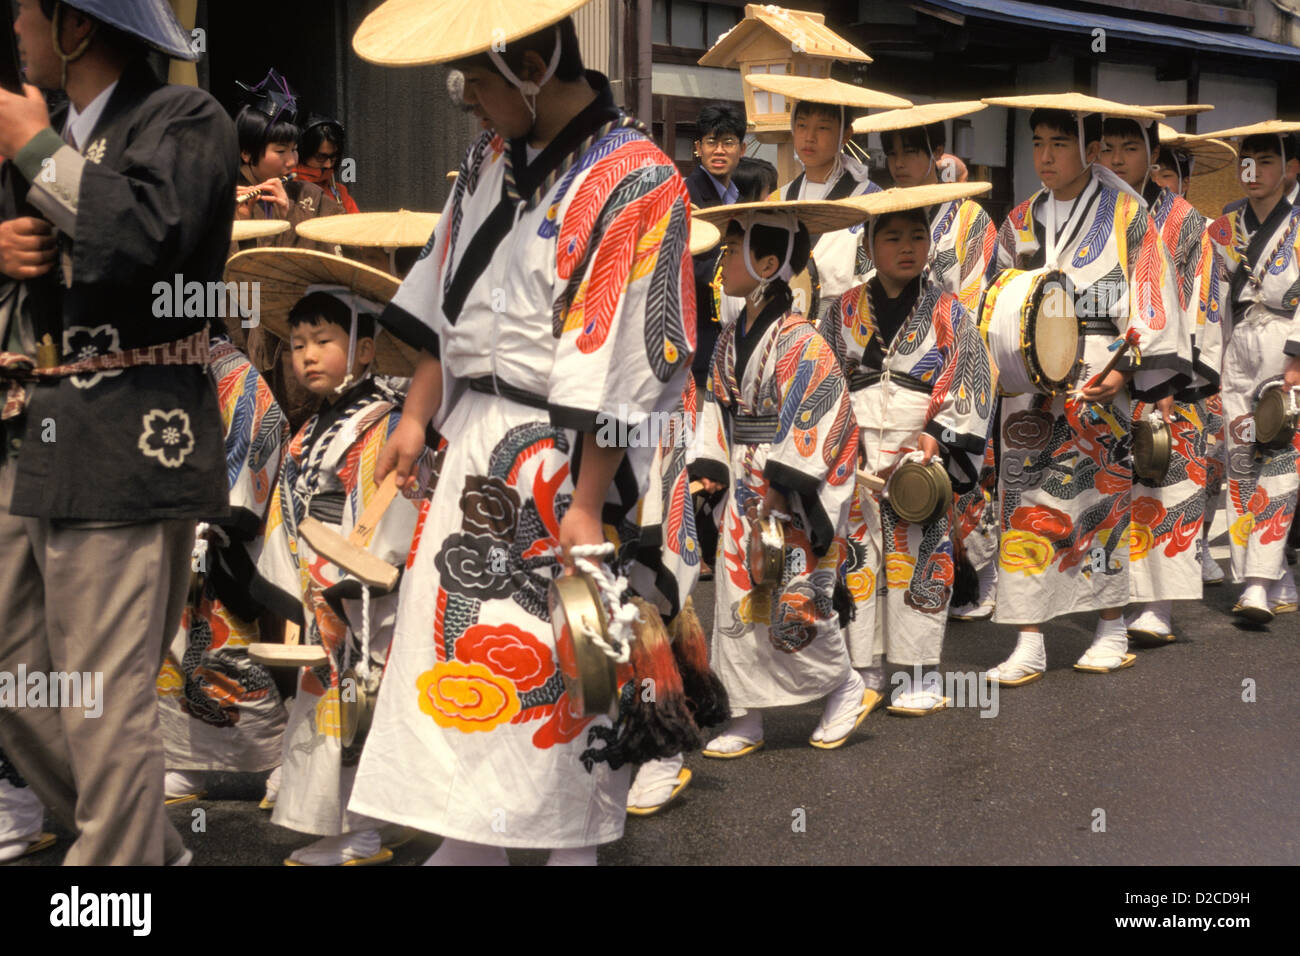 Japan, Takayama. Men And Children In Procession At Festival, With Percussion Instruments. Stock Photo